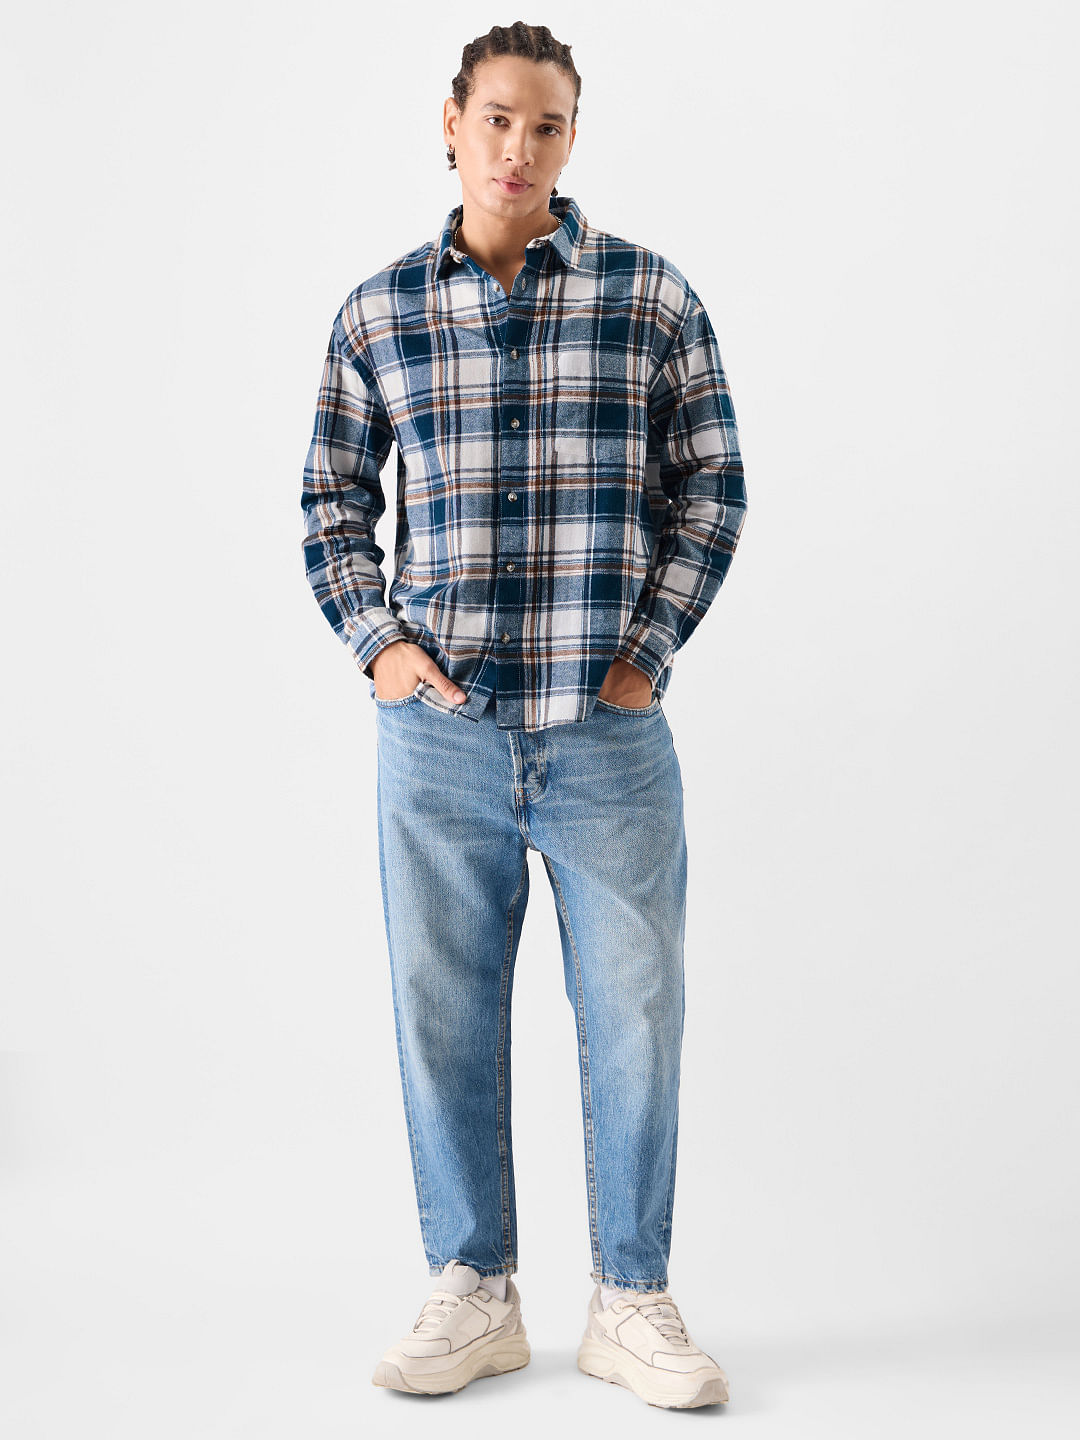 Buy Plaid: Blue And White Men Relaxed Shirts Online